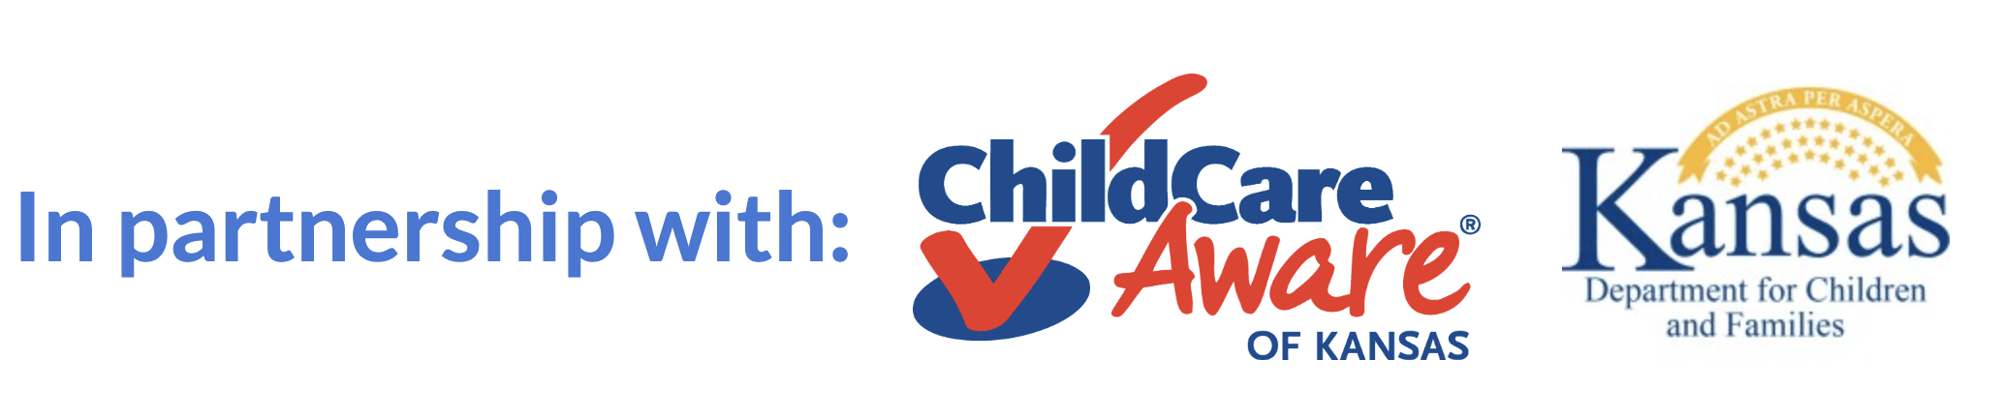 brightwheel is partnering with ChildCare Aware of Kansas and Kansas Department for Children and Families to provide free access to brightwheel childcare software for free